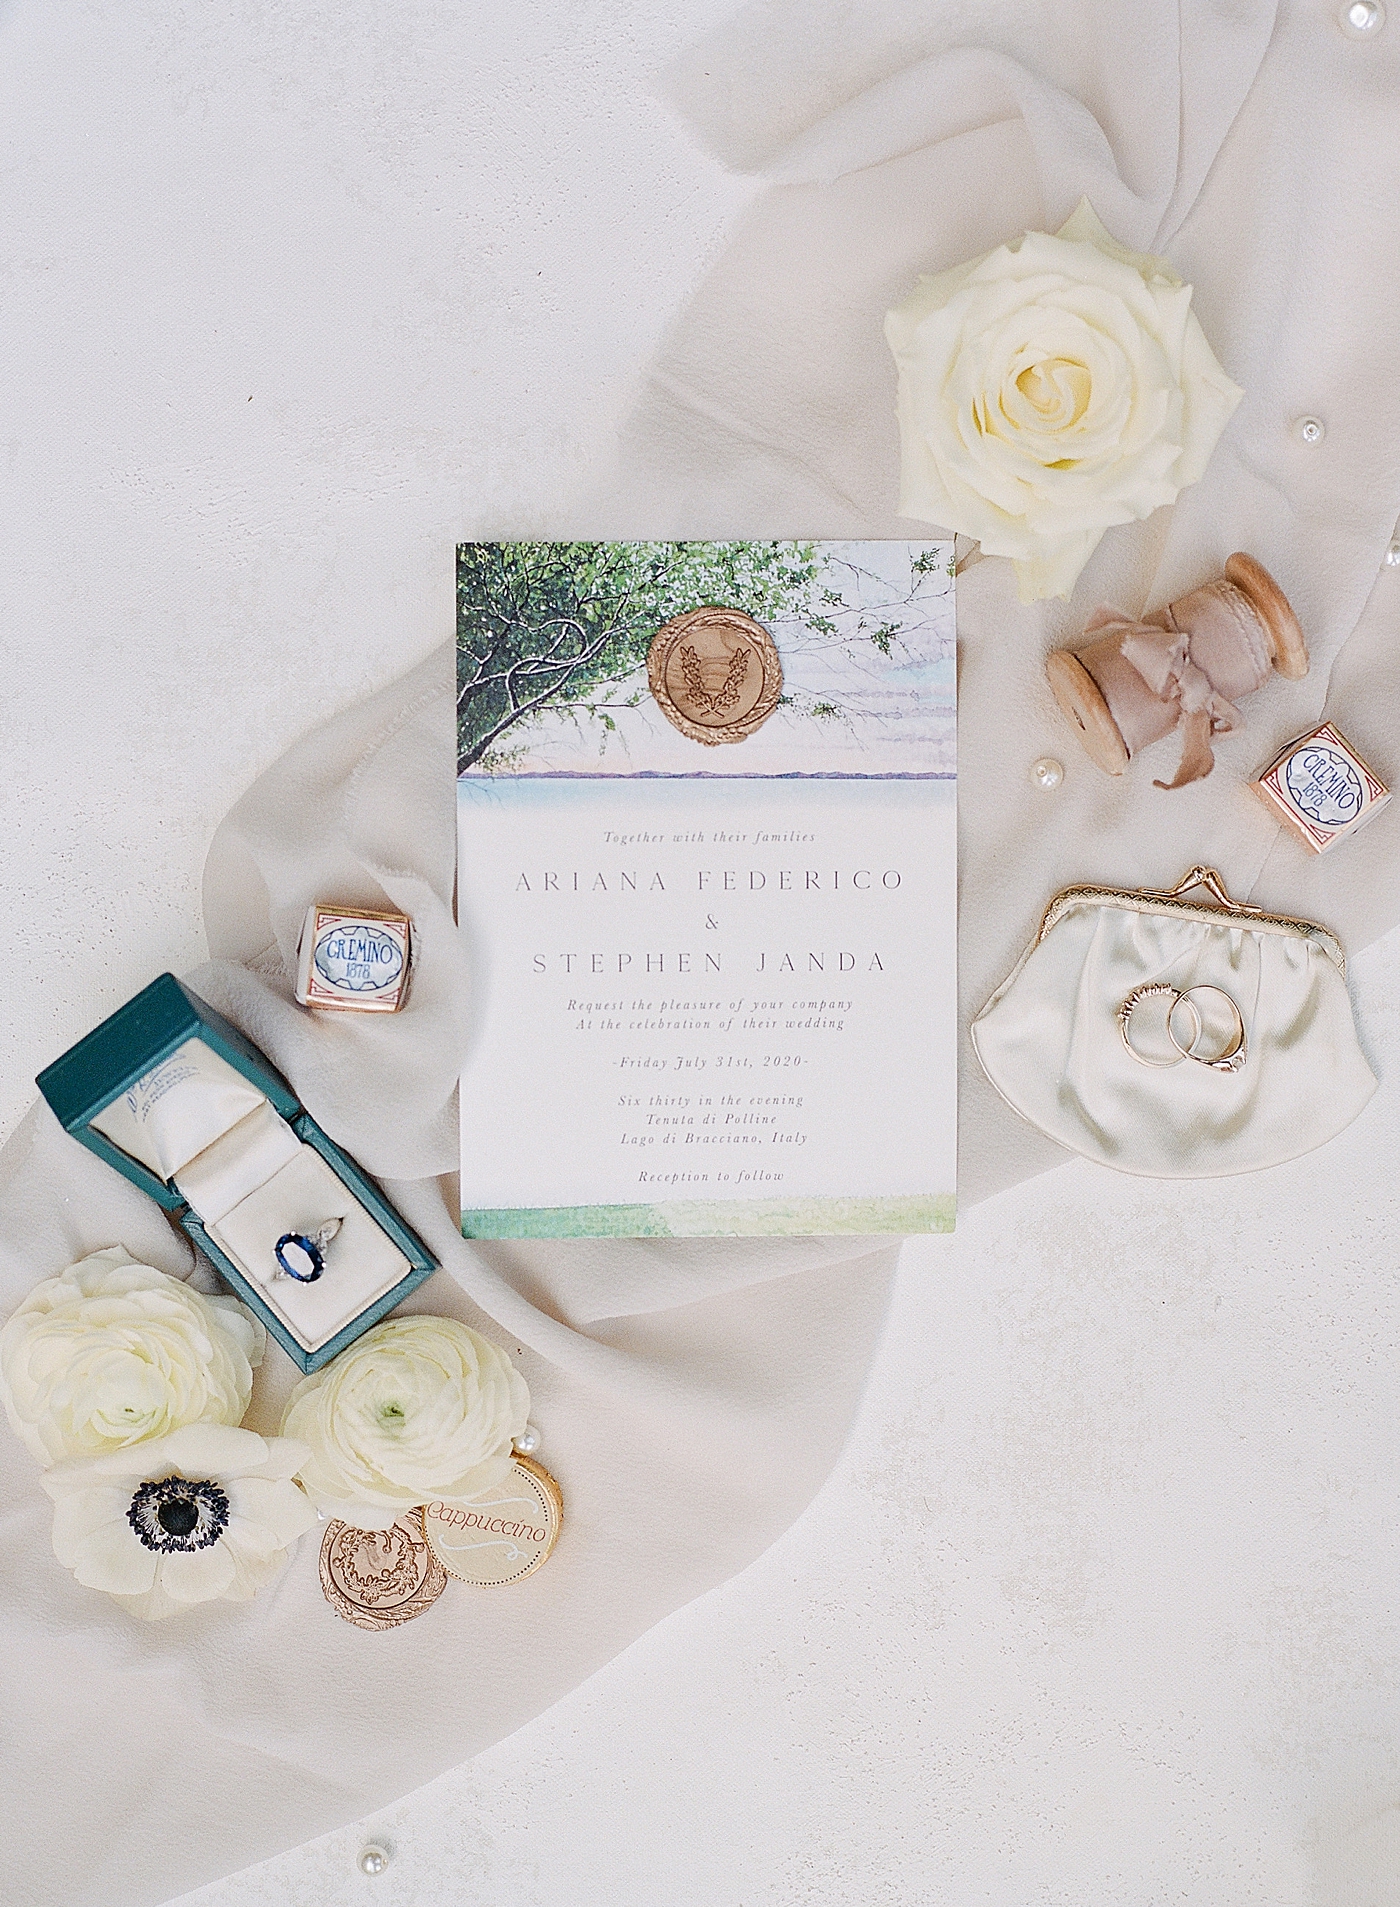 Wedding invitation with bridal jewelry | Photo by Hope Helmuth Photography